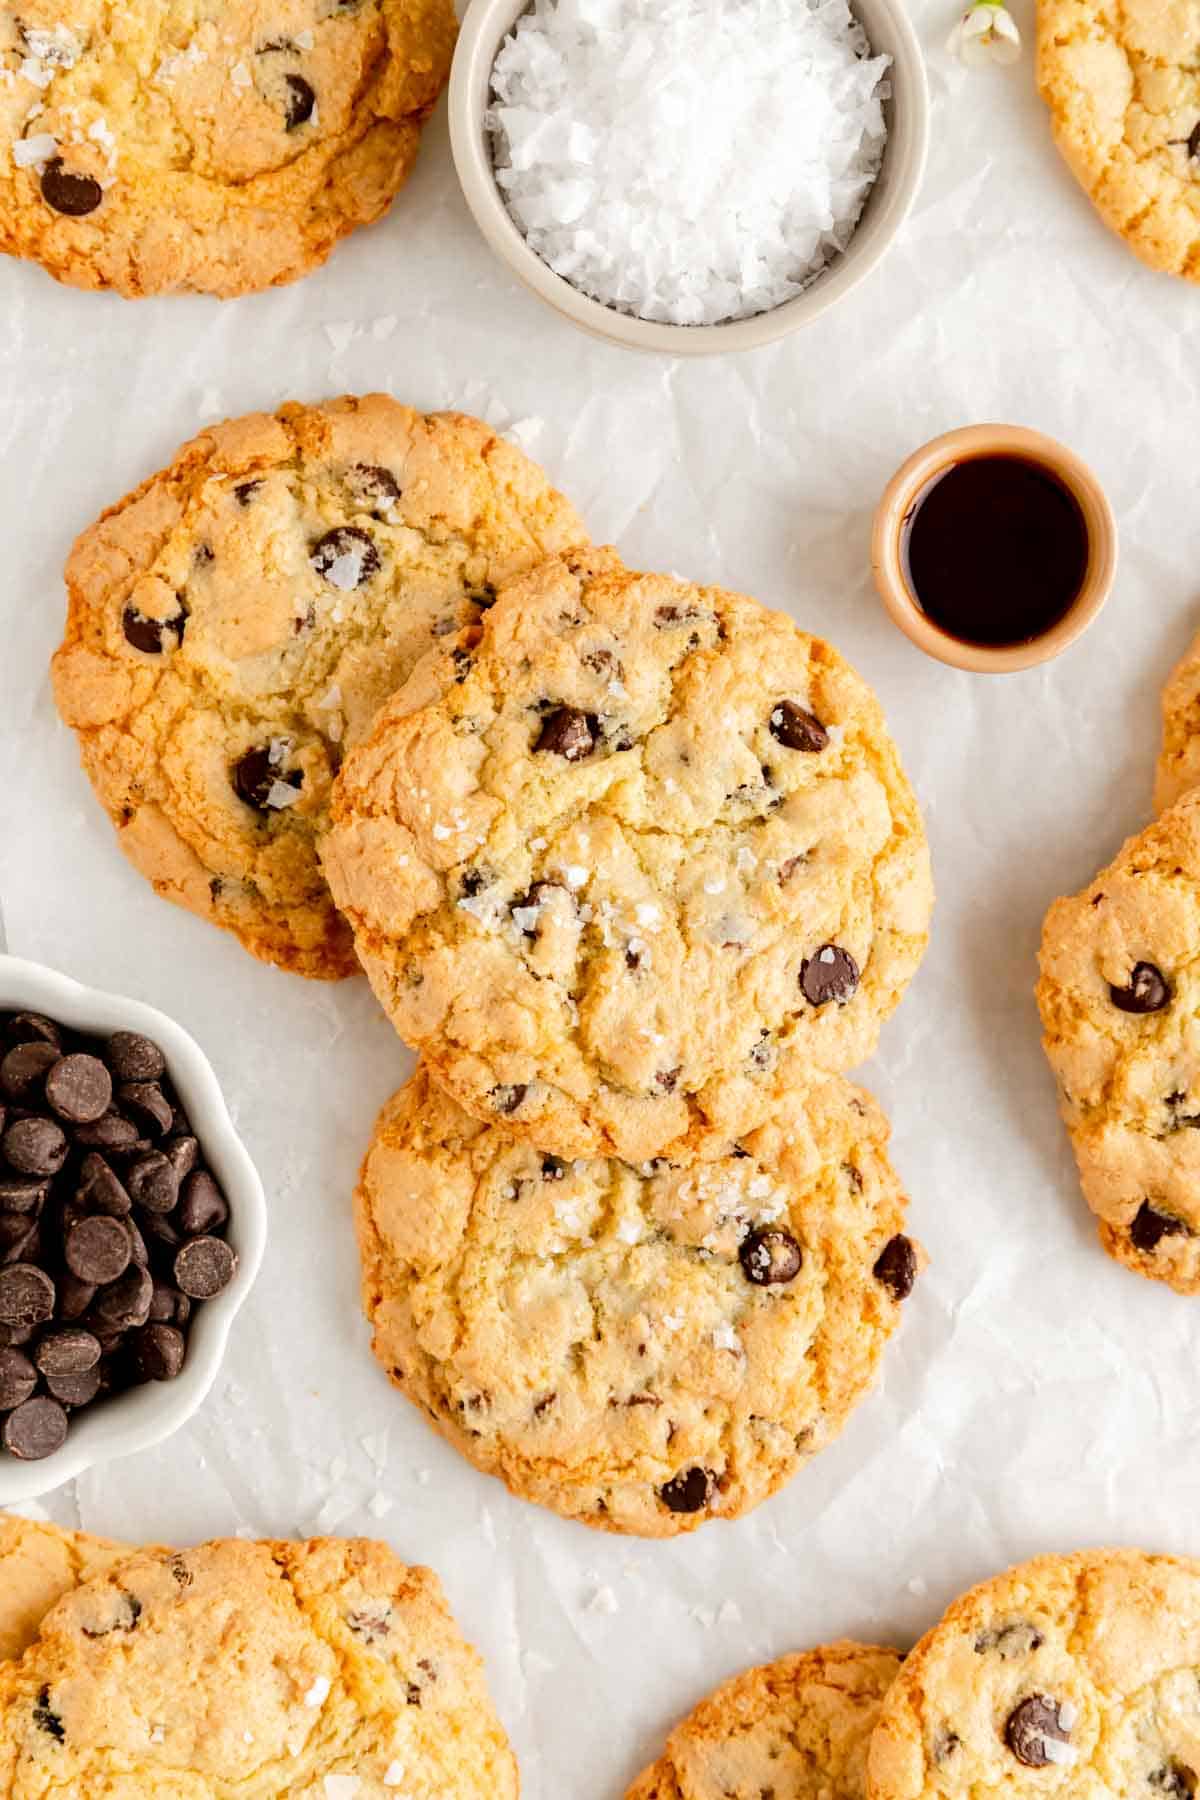 three chocolate chip cookies stacked on parchment paper surrounded by other cookies and ingredient bowls